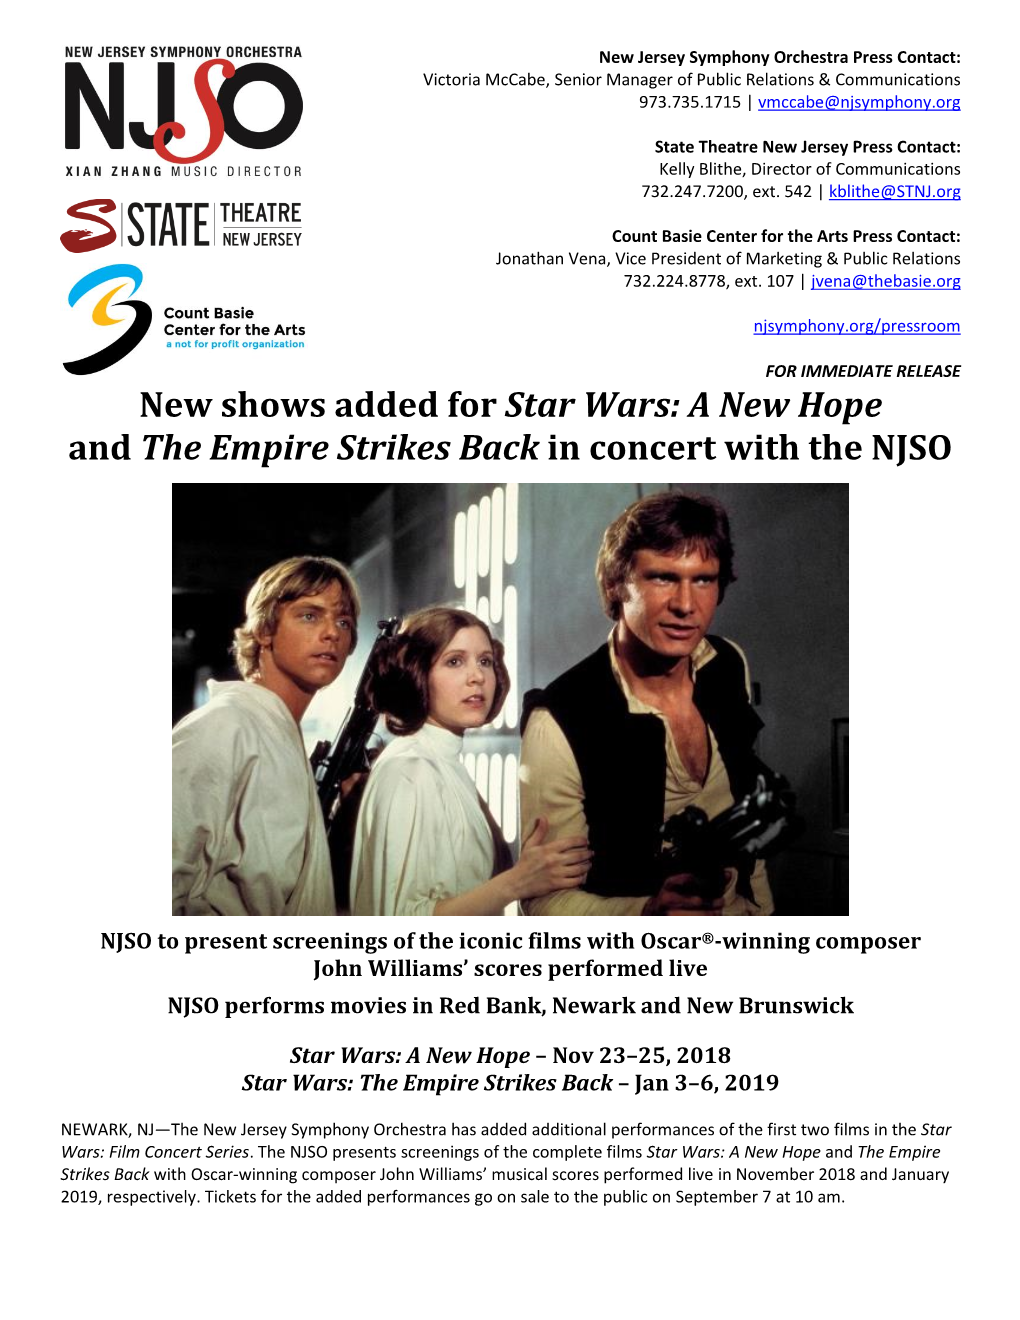 New Shows Added for Star Wars: a New Hope and the Empire Strikes Back in Concert with the NJSO